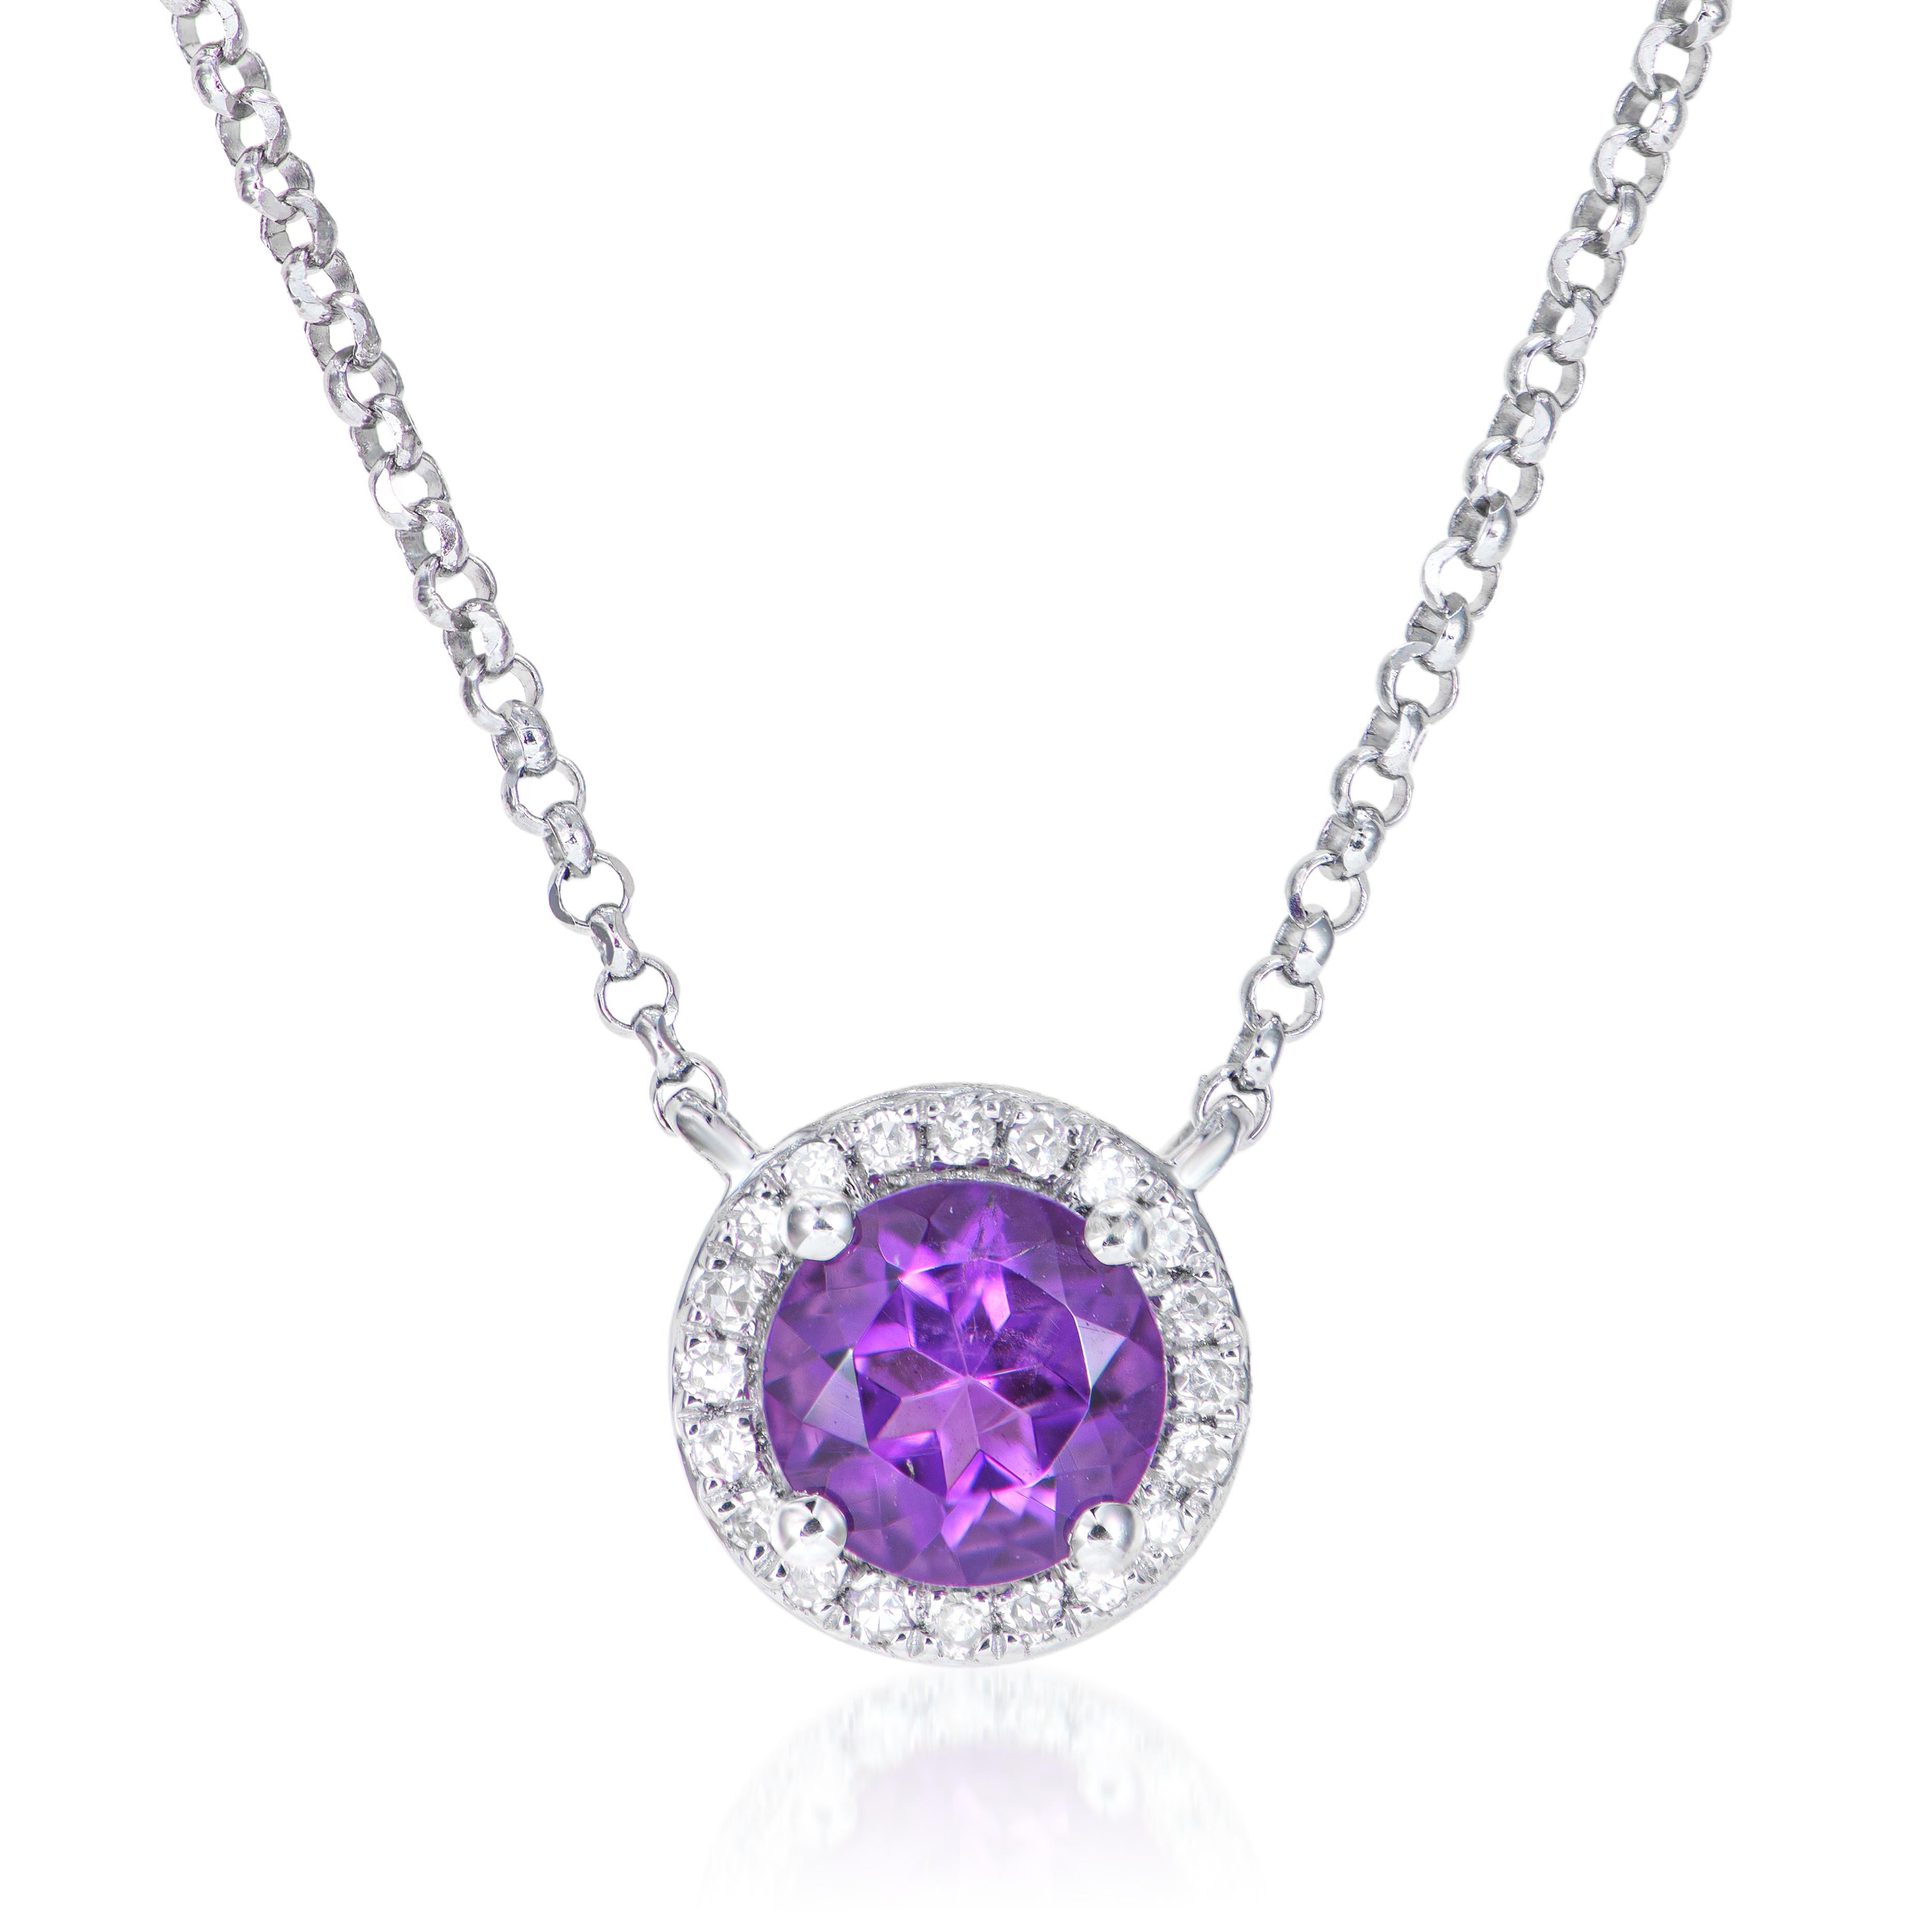 Round Cut 0.40 Carat Amethyst Pendant in 18Karat White Gold with White Diamond. For Sale